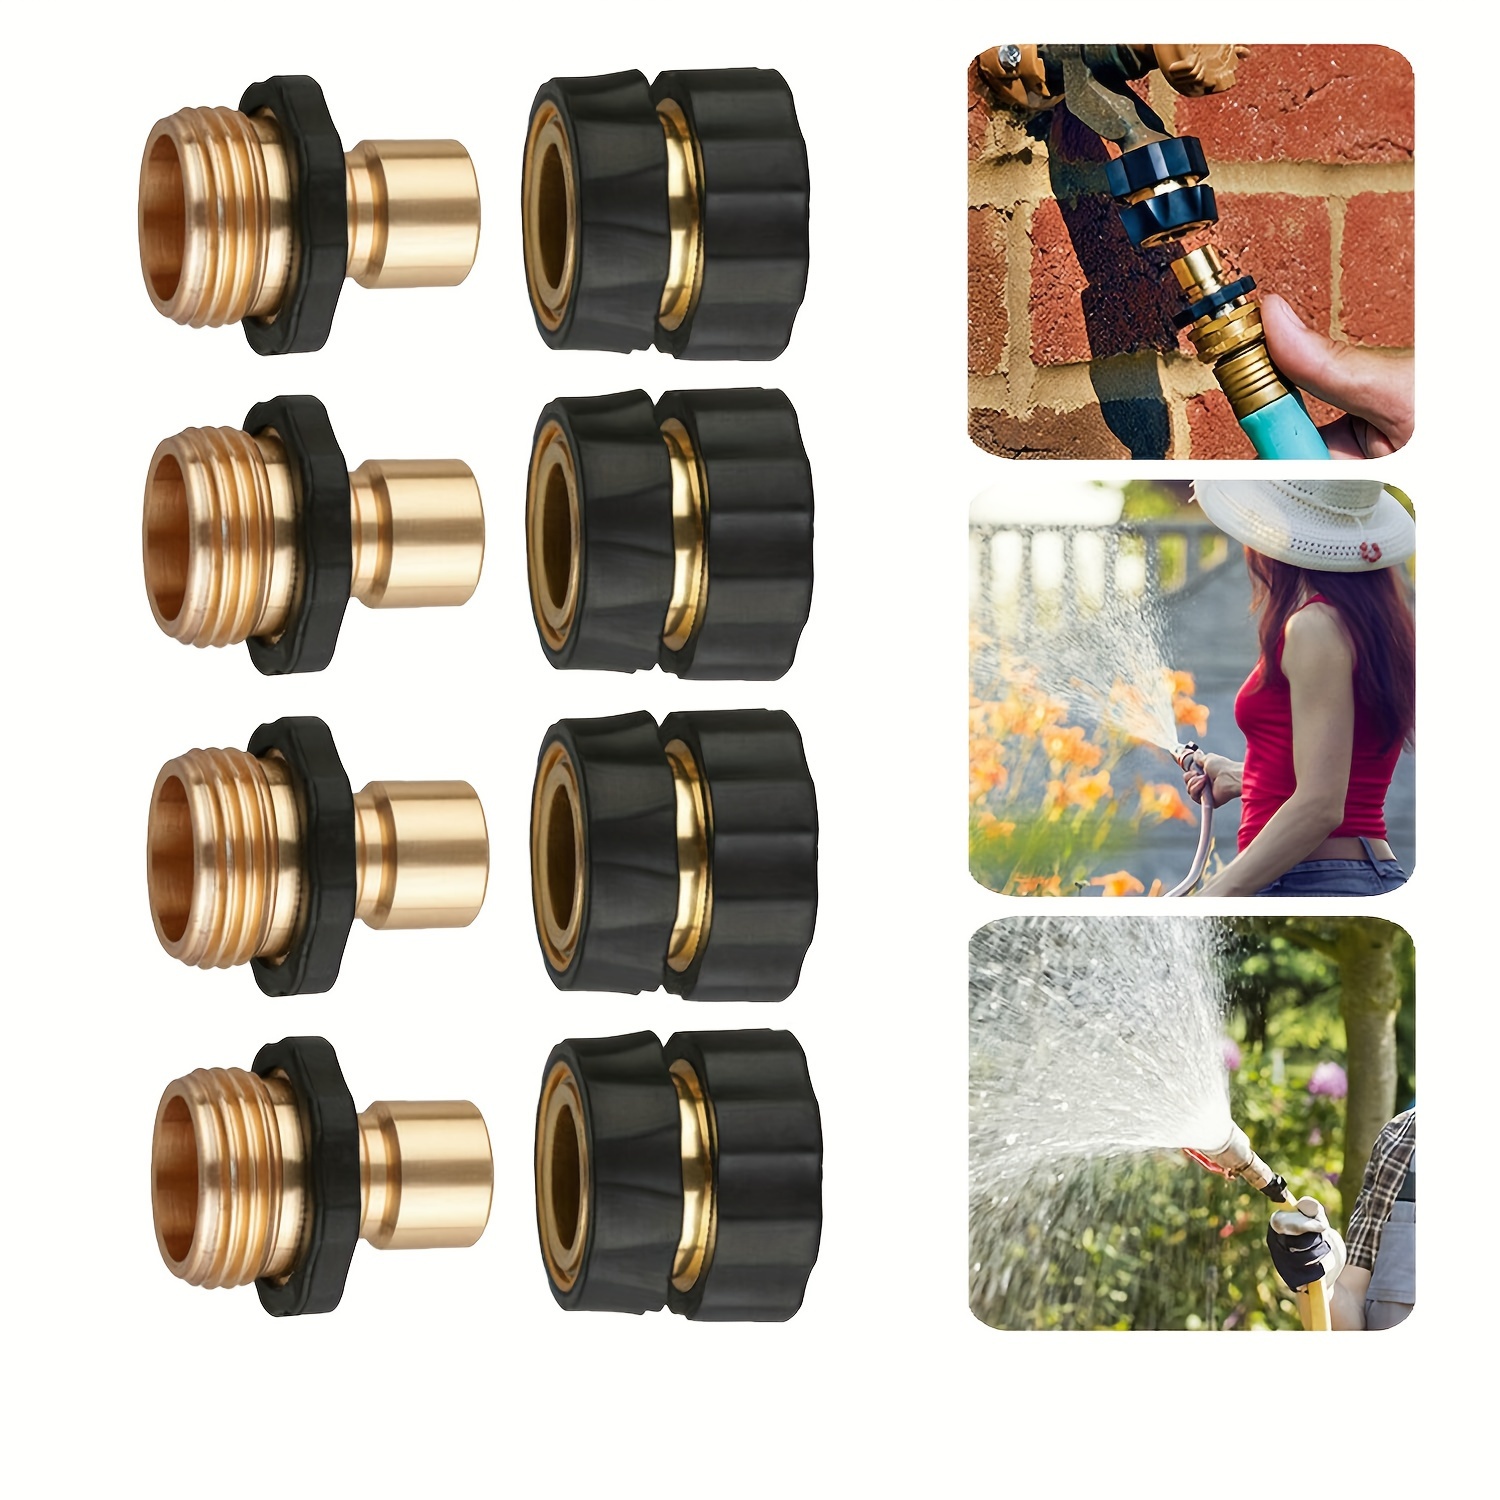 2Sets Brass Bulkhead Fitting 1/2” Female x 3/4”GHT Male Double Threaded  Bulkhead Water Tank Connector and 3/4GHT Female Thread Plug End Caps Kit